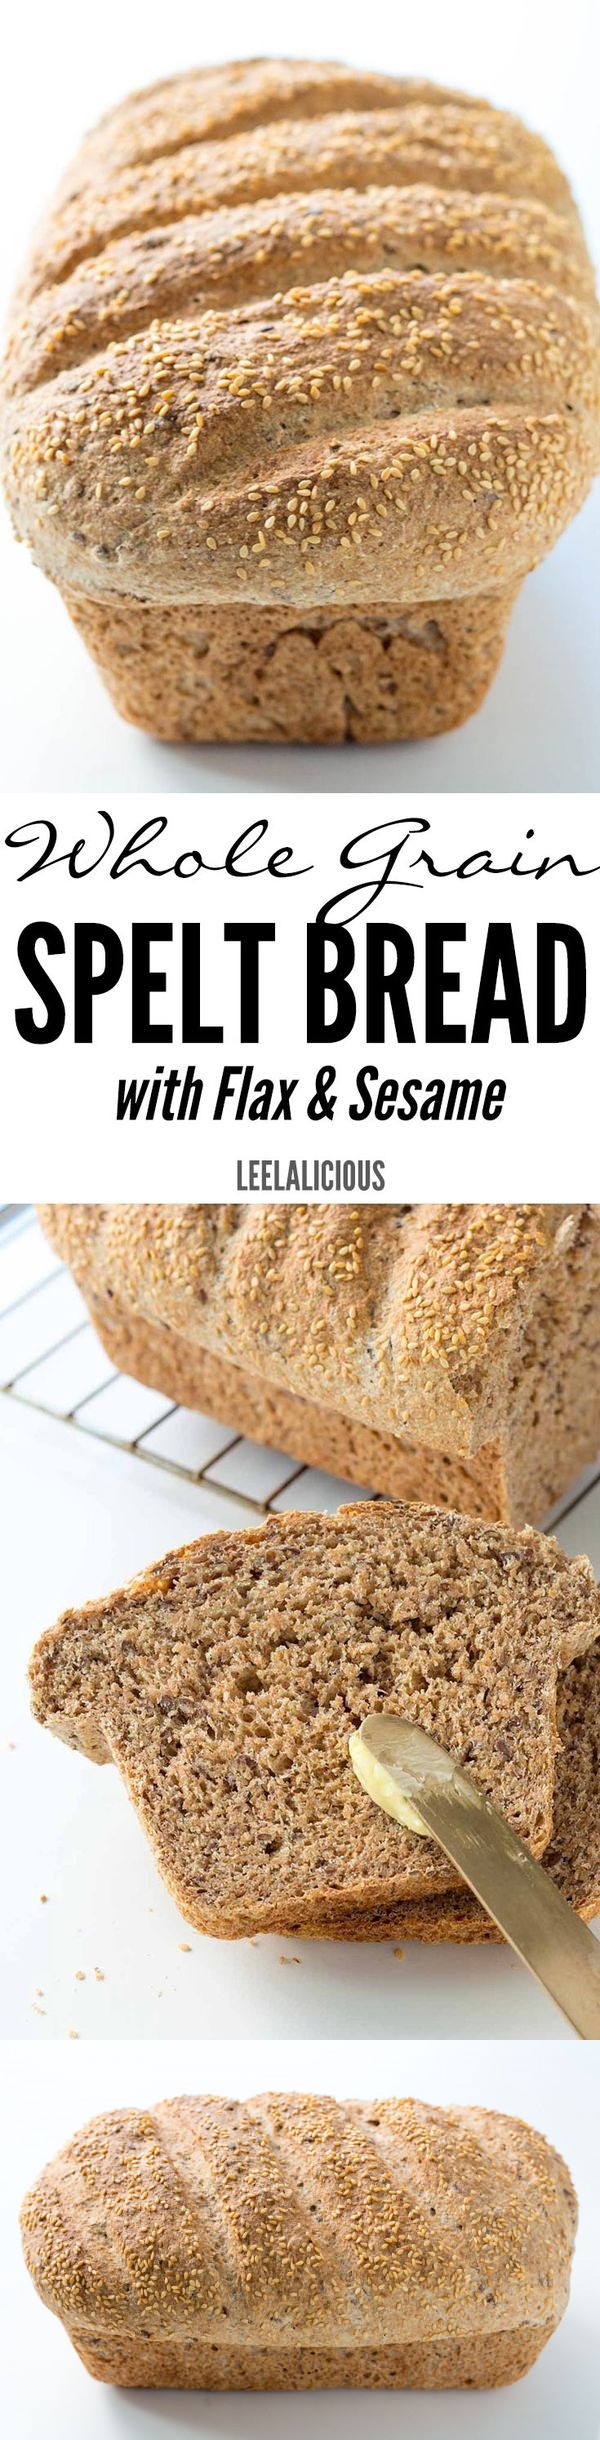 Easy Whole Grain Spelt Bread with Flax and Sesame